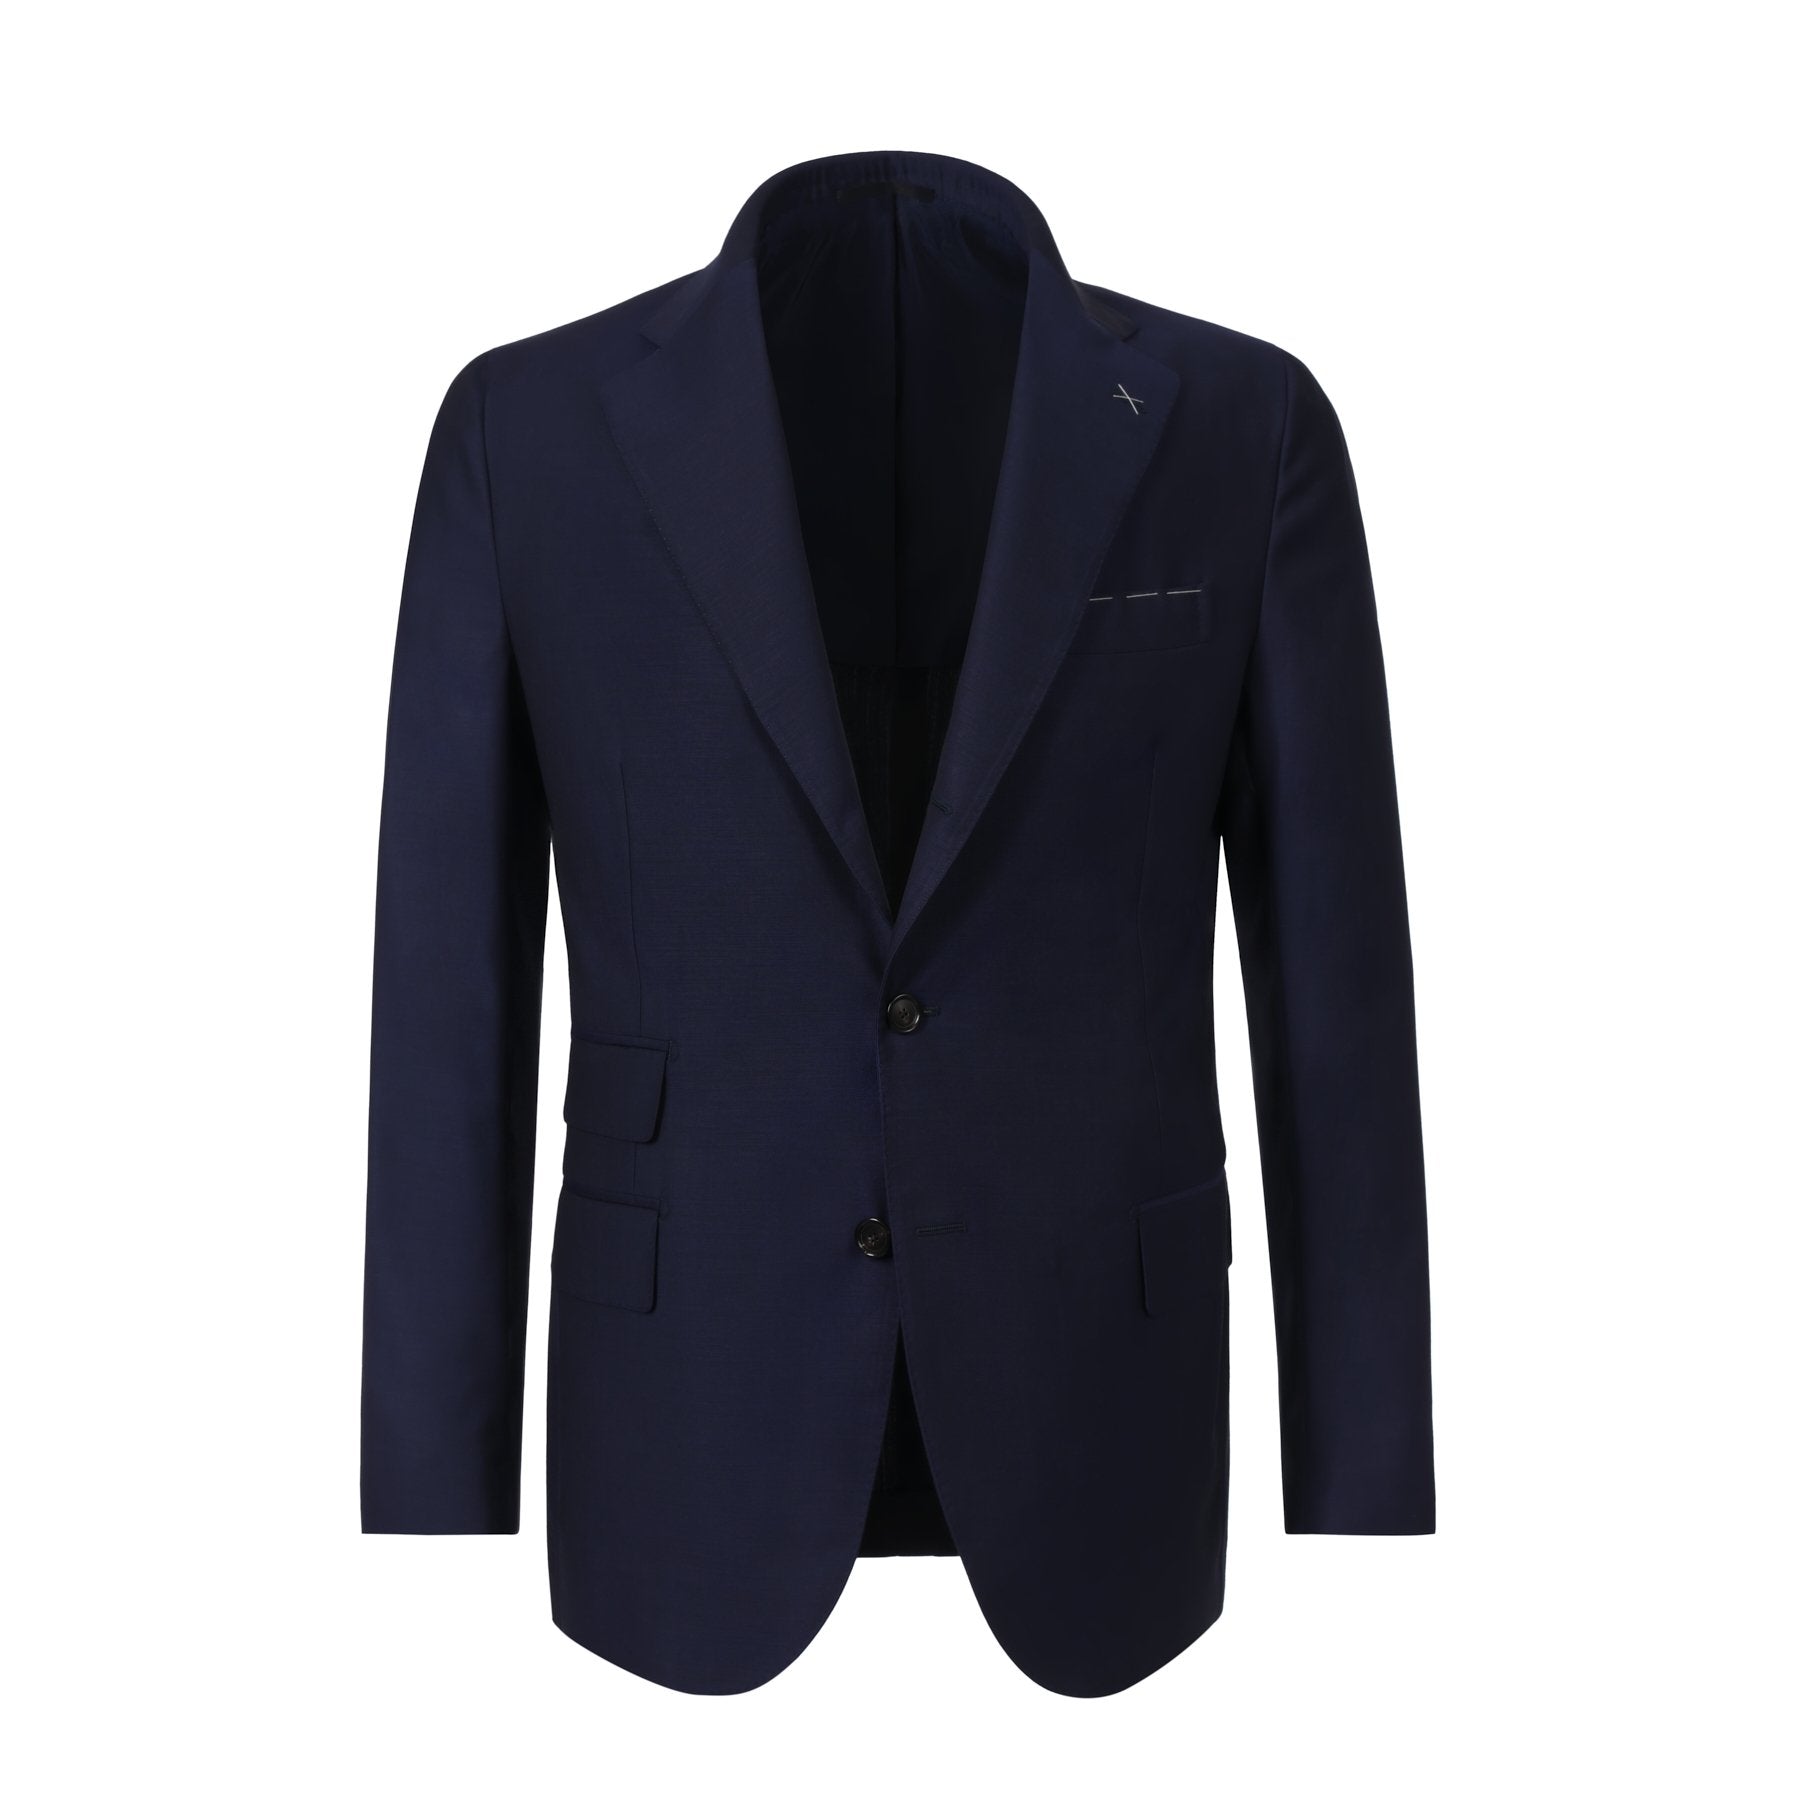 Single-Breasted Wool Pont Neuf Suit - Ready to Wear